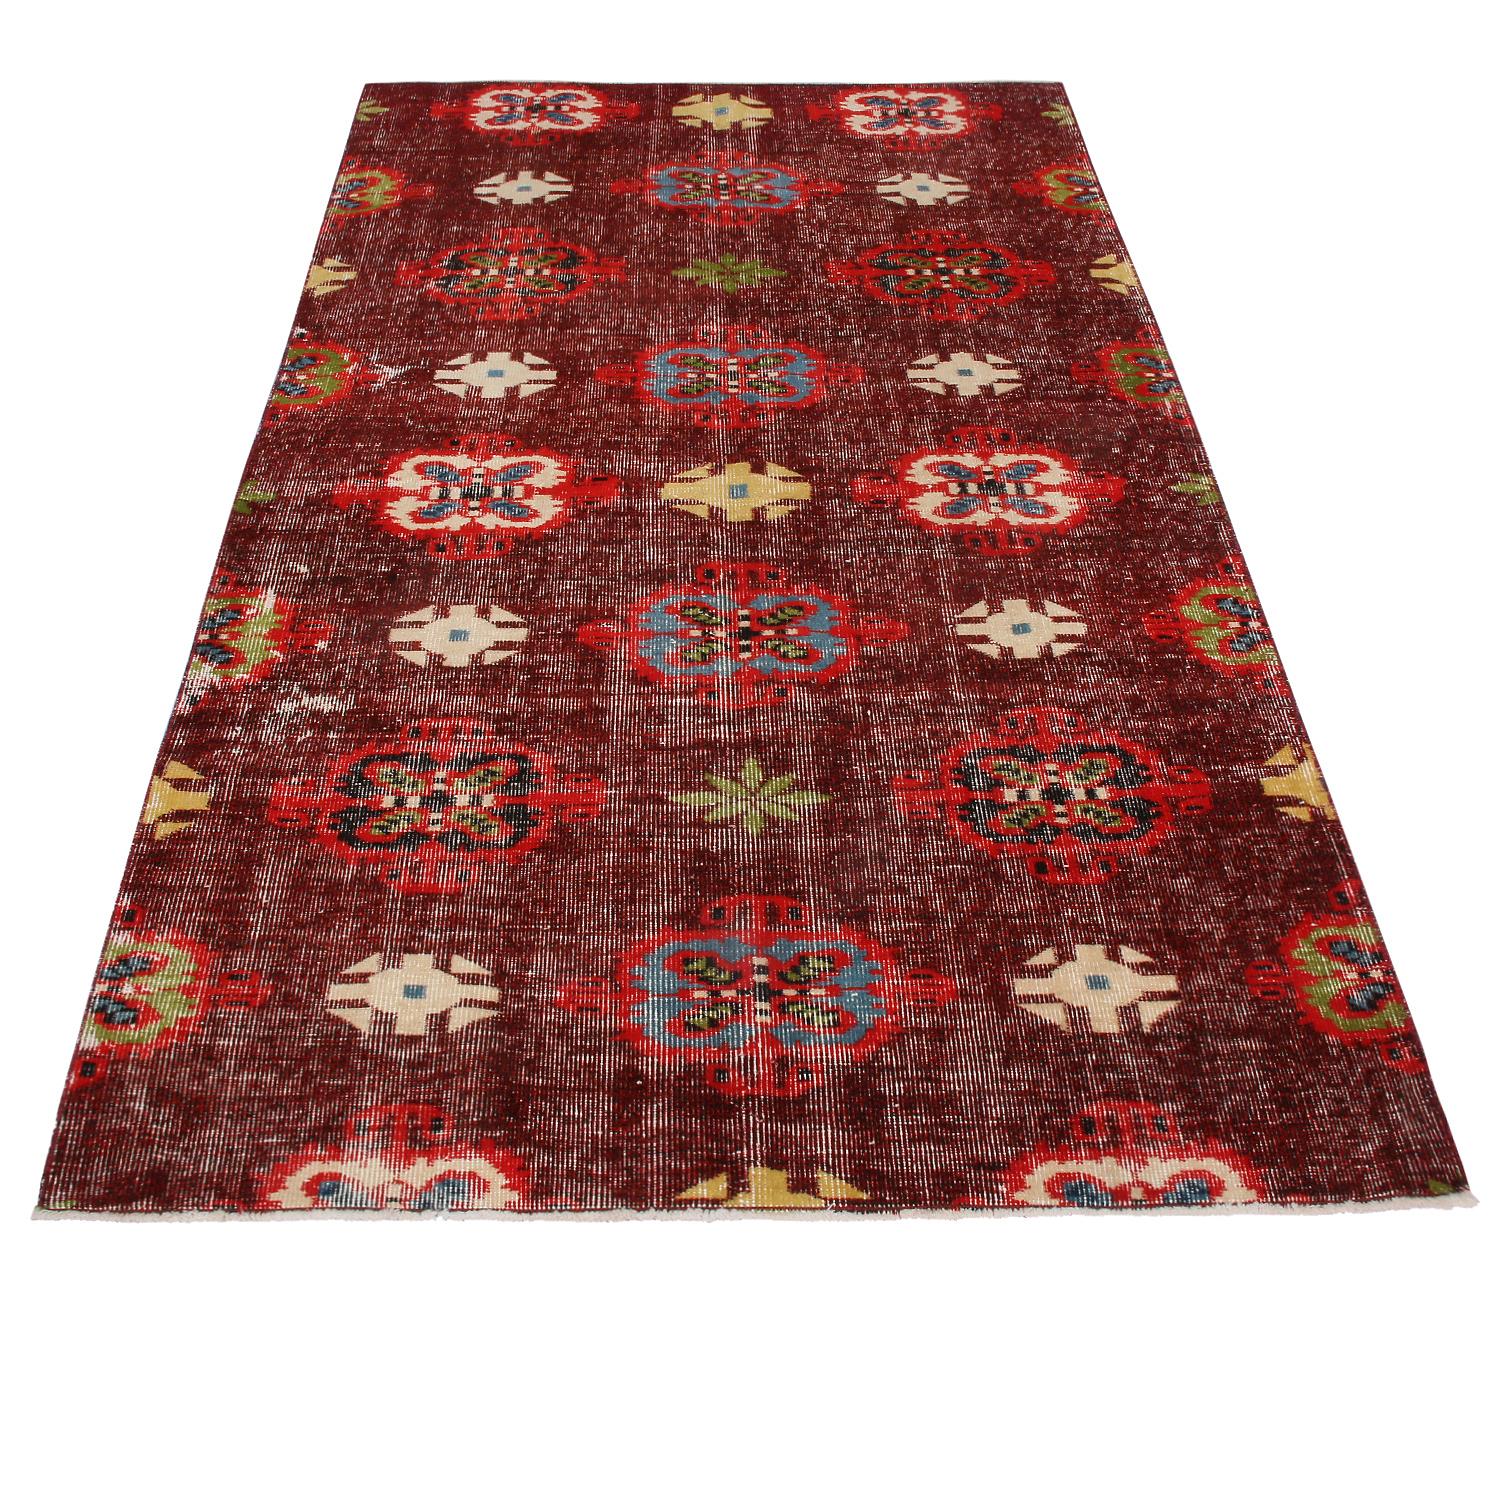 Hand knotted in Turkey originating between 1960-1970, this vintage midcentury runner joins Rug & Kilim’s midcentury Pasha collection celebrating Turkish icon Zeki Müren with Josh’s hand picked favorites from this period. The very subtle, naturally